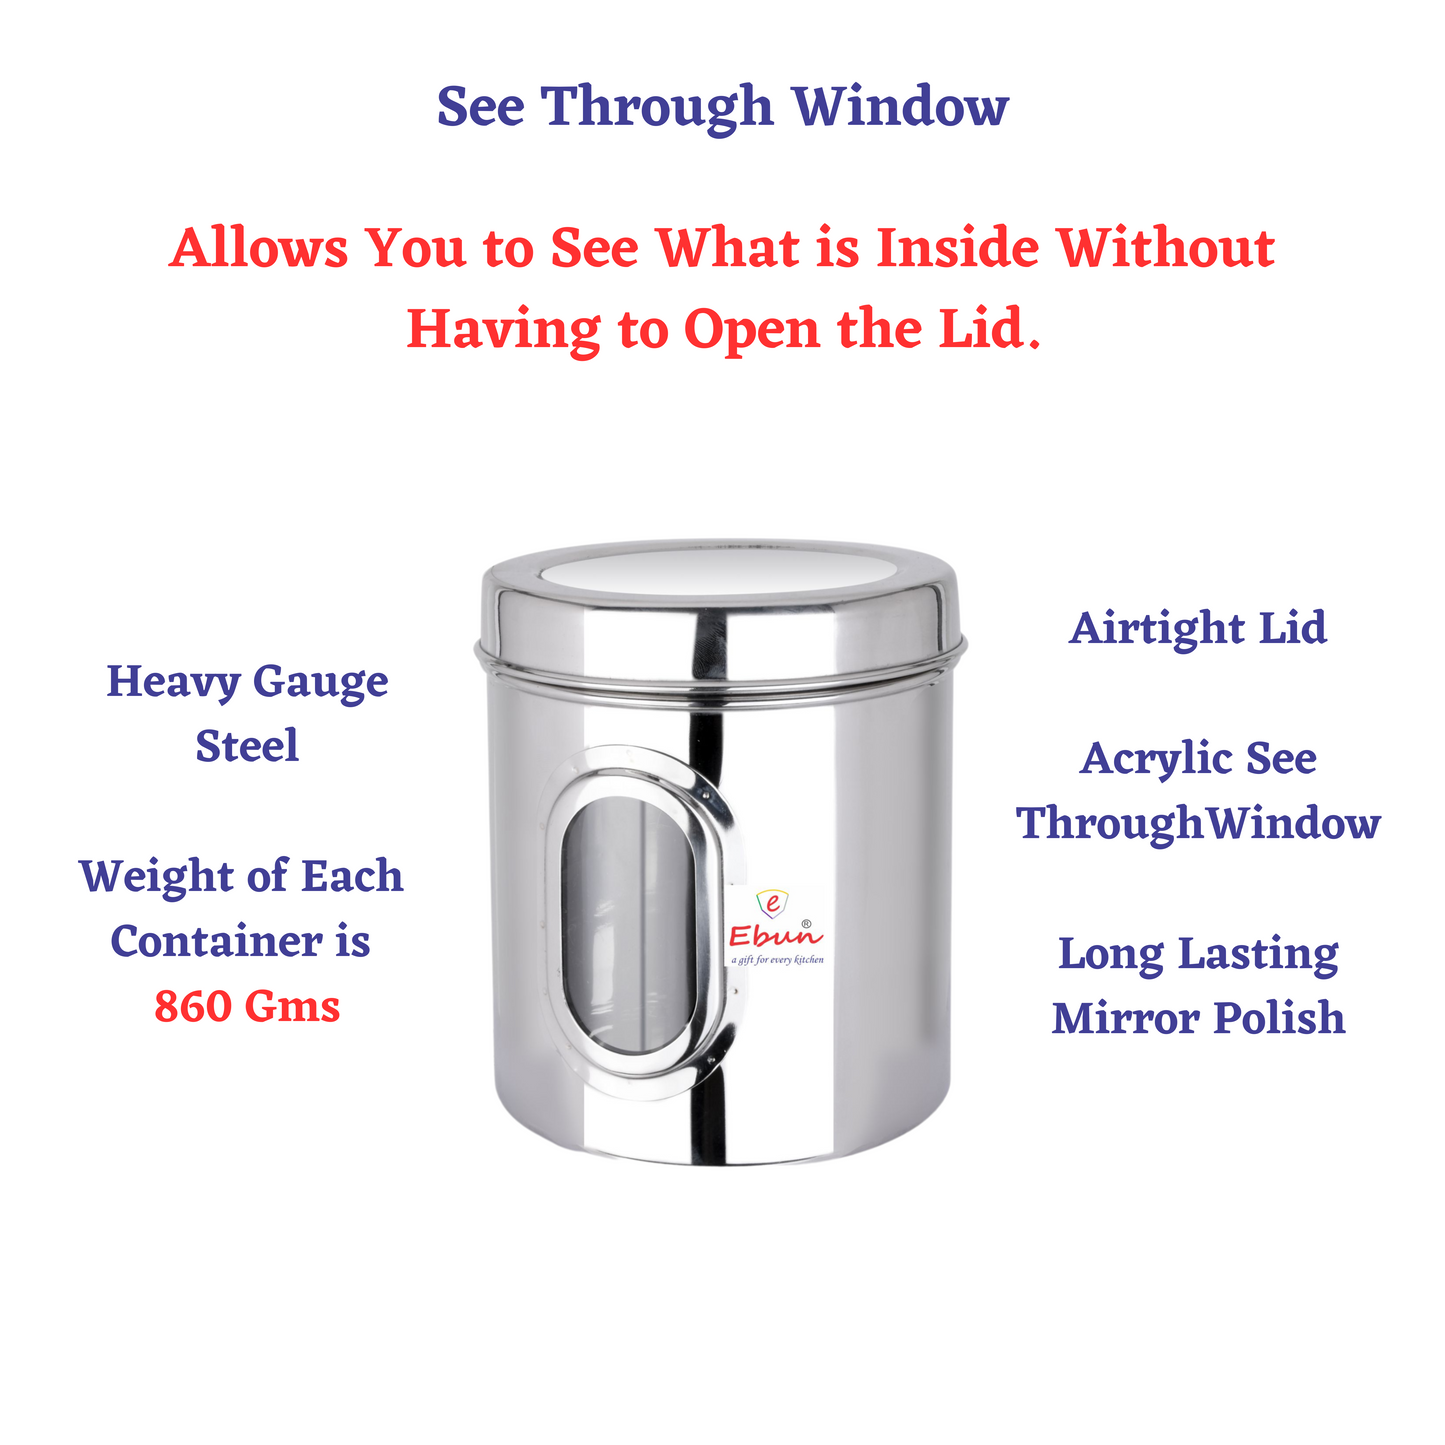 air tight steel container | steel container 5kg | 5kg steel container for kitchen storage | food storage containers steel | steel air tight containers for storage | steel container for kitchen | container steel | air tight steel containers for storage